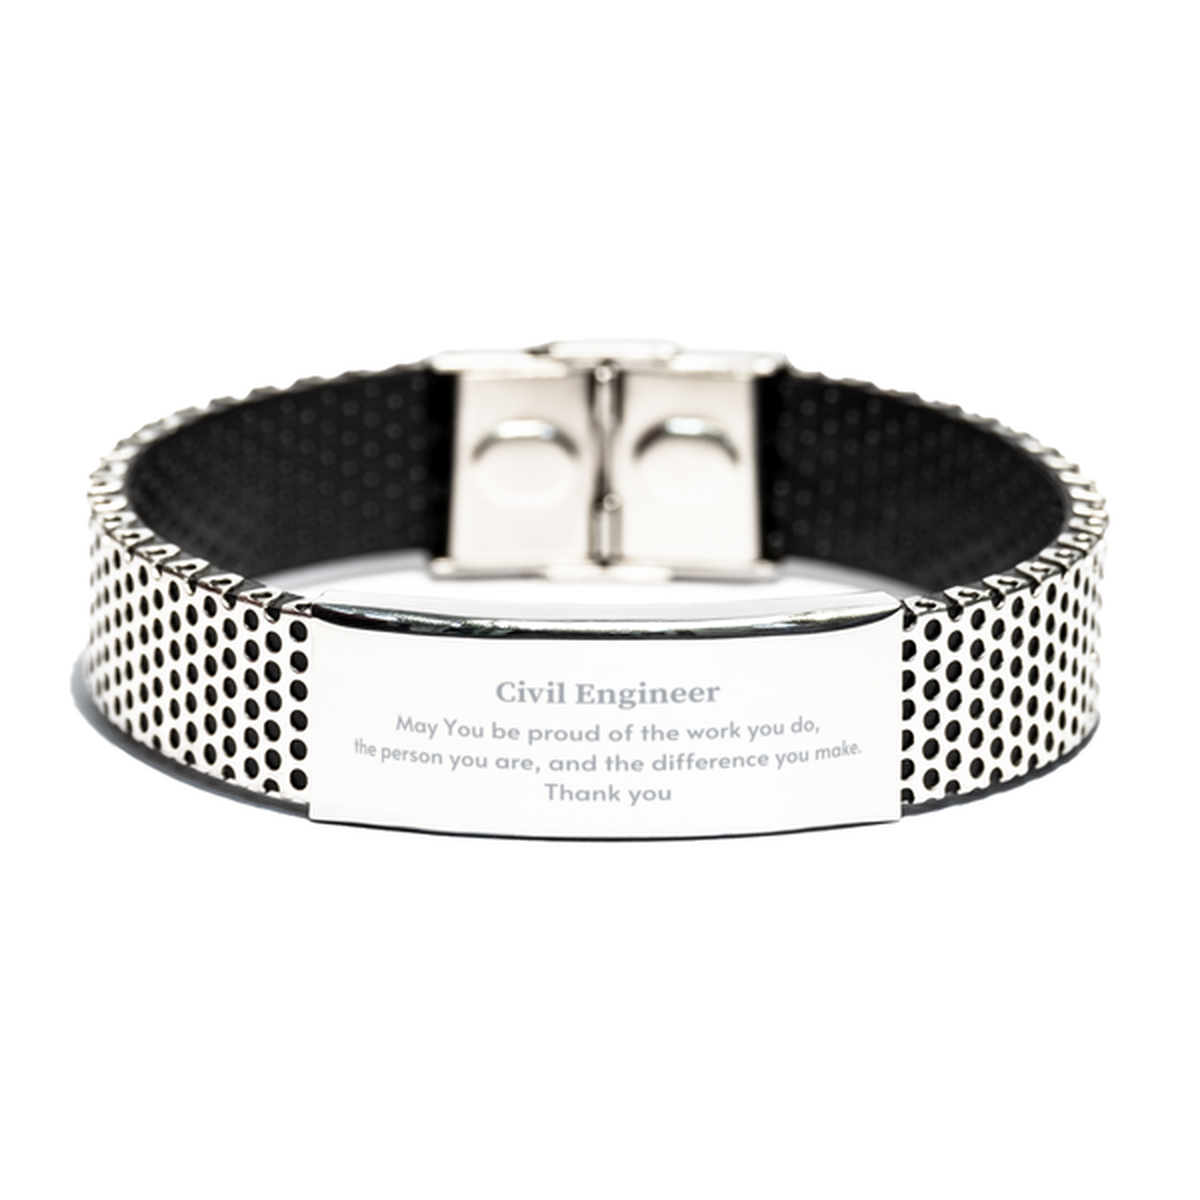 Heartwarming Stainless Steel Bracelet Retirement Coworkers Gifts for Civil Engineer, Civil Engineer May You be proud of the work you do, the person you are Gifts for Boss Men Women Friends